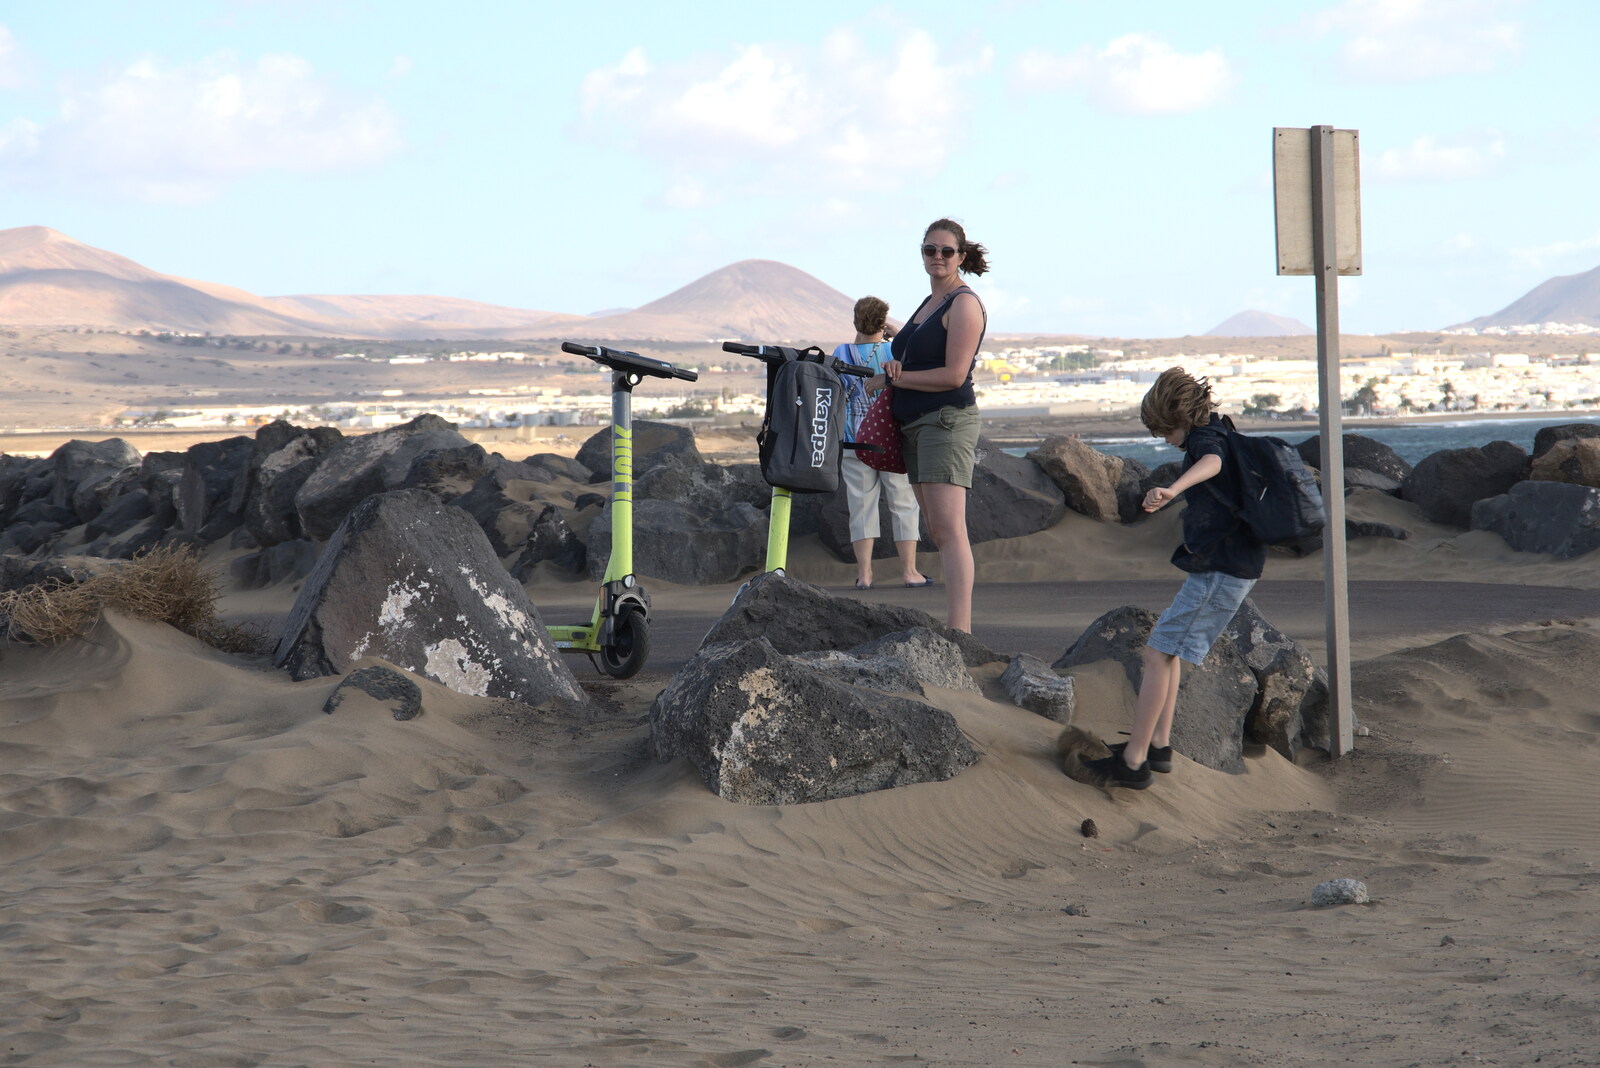 Isobel and the scooters from Five Days in Lanzarote, Canary Islands, Spain - 24th October 2021